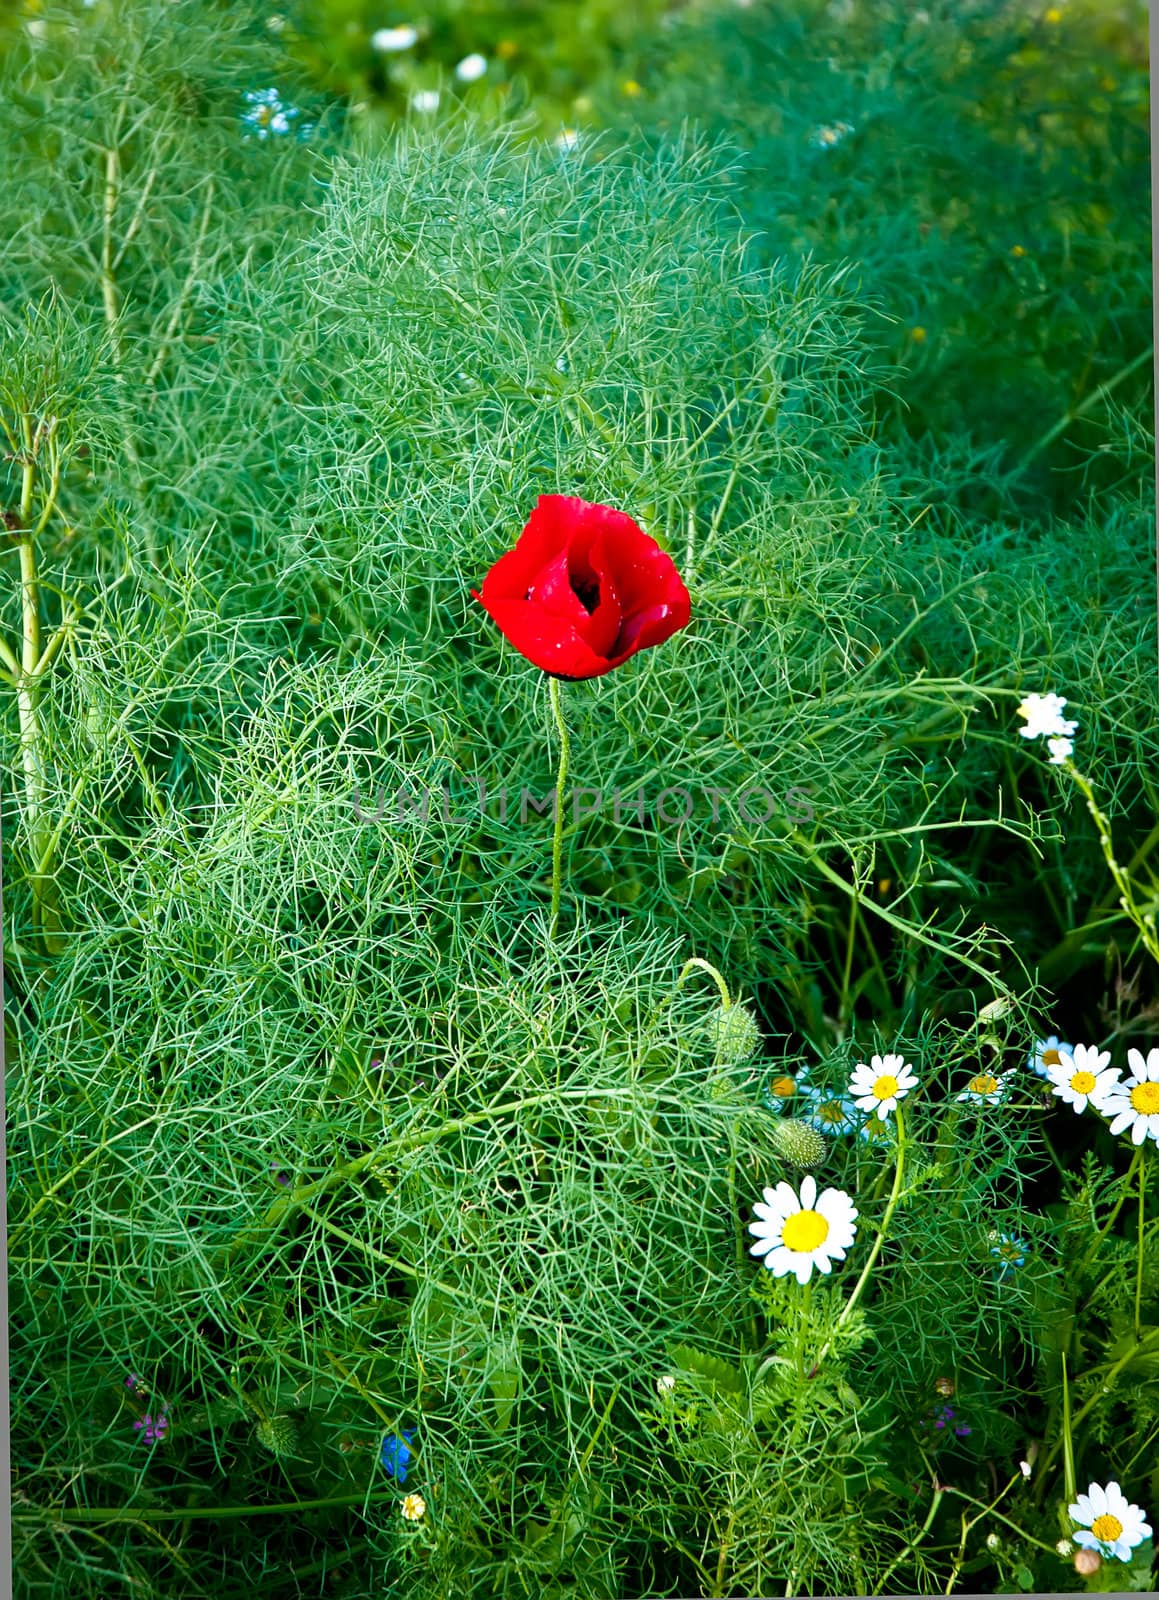 Wild poppies blooming in the field.